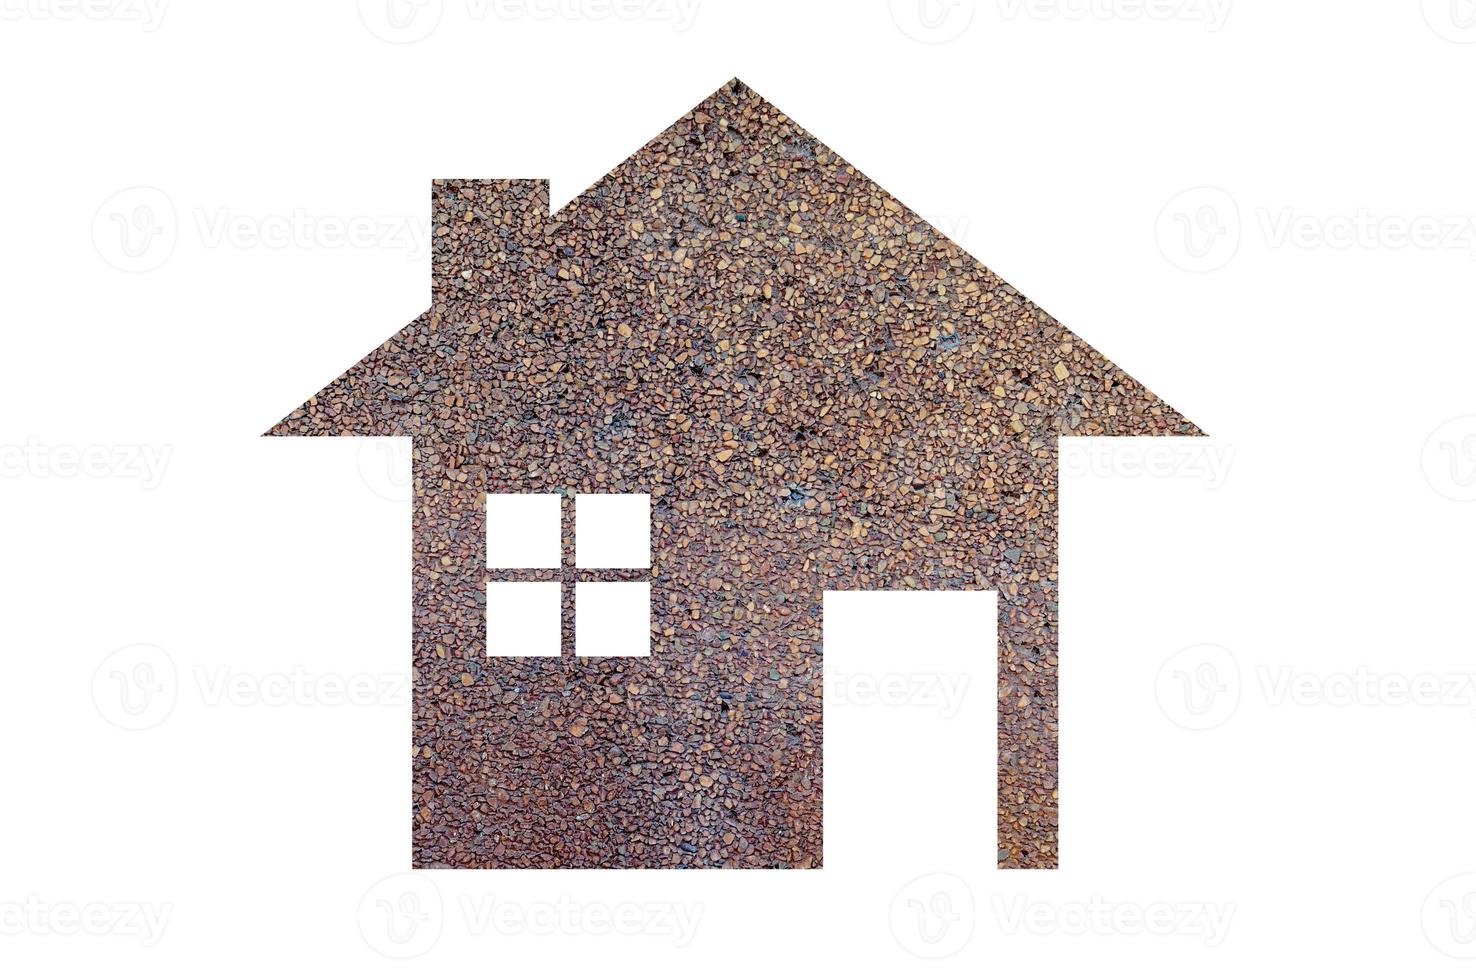 house icon from brick stone texture background as symbol of mortgage,Dream house on nature background, isolated on white photo